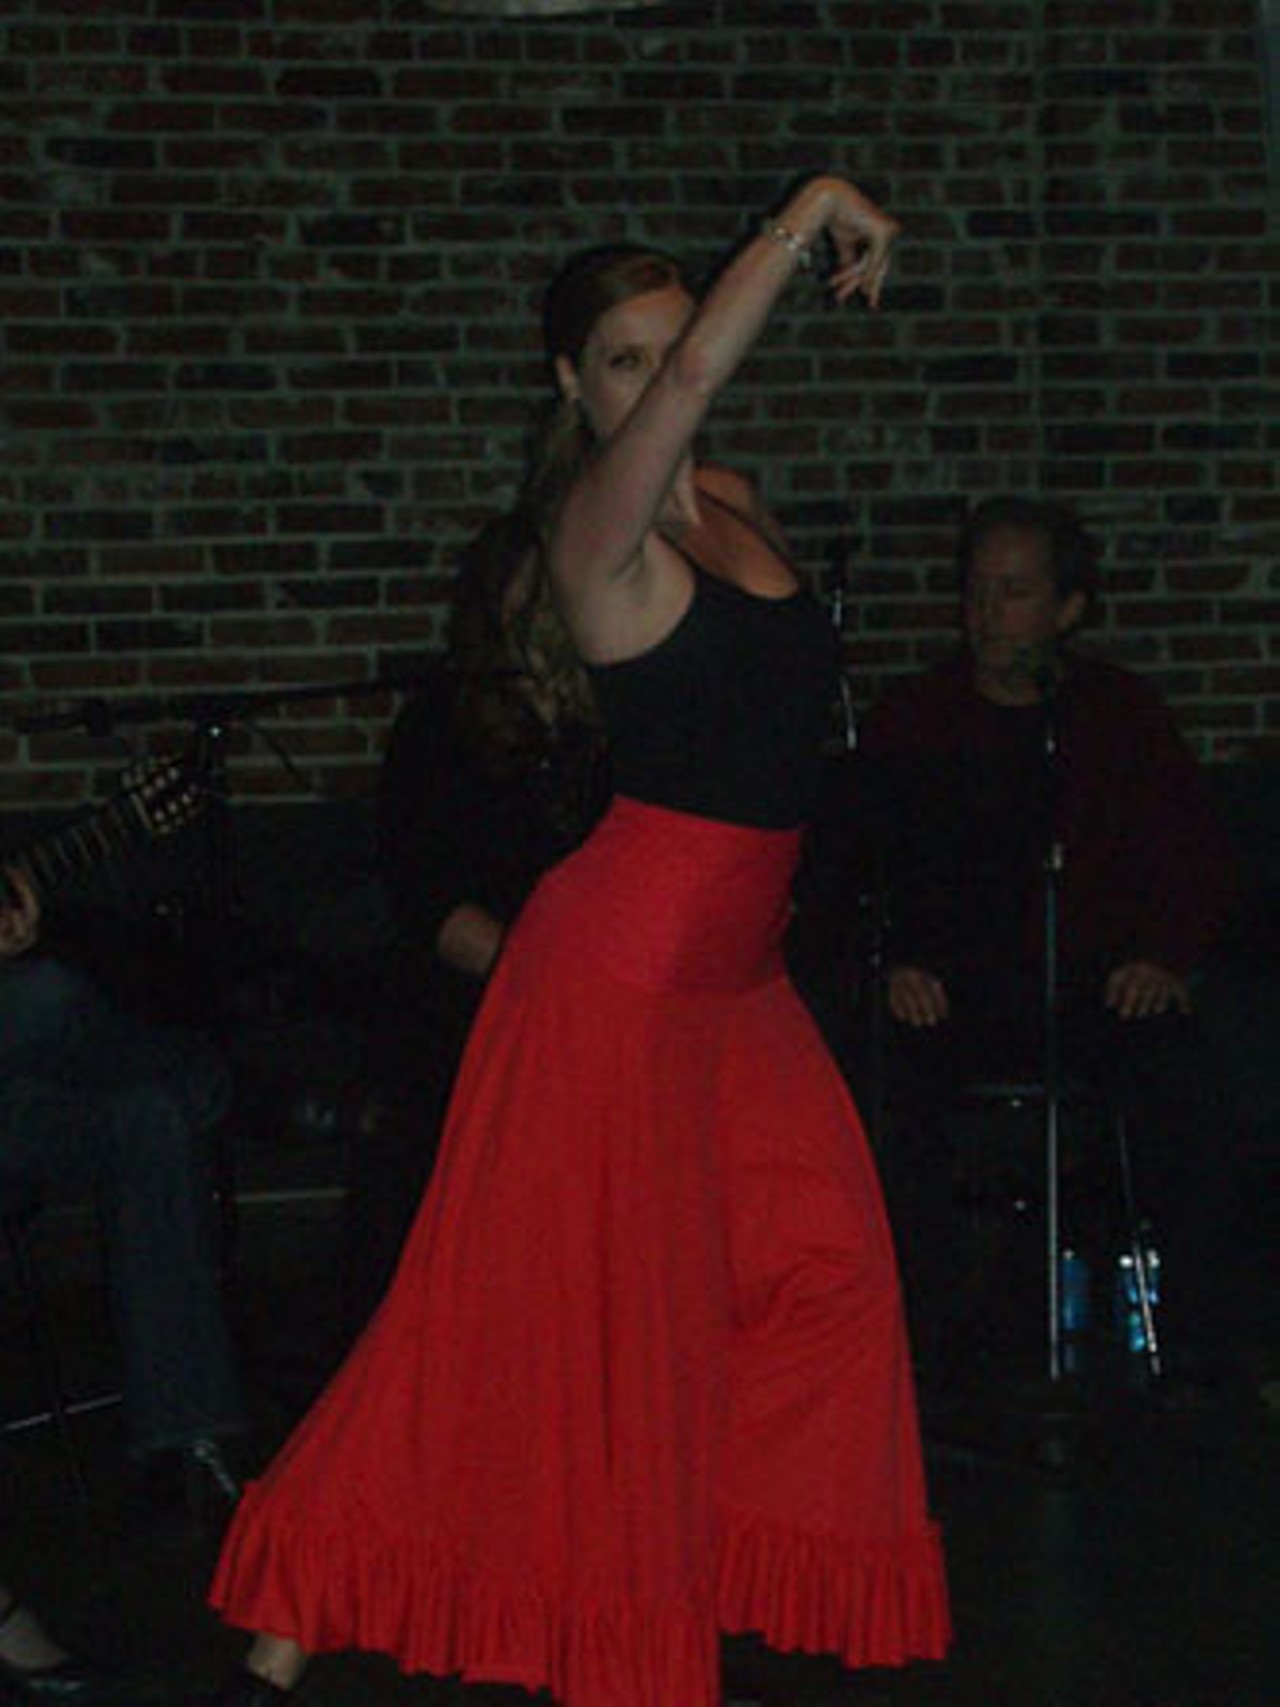 Los Flamencos and guest artists, Pier Franco, dancer; Henry Claude, percussionist; Andrew "El Gitanito" John, singer; and Josie Niemira, singer, performed at Sol Lounge Sunday night.